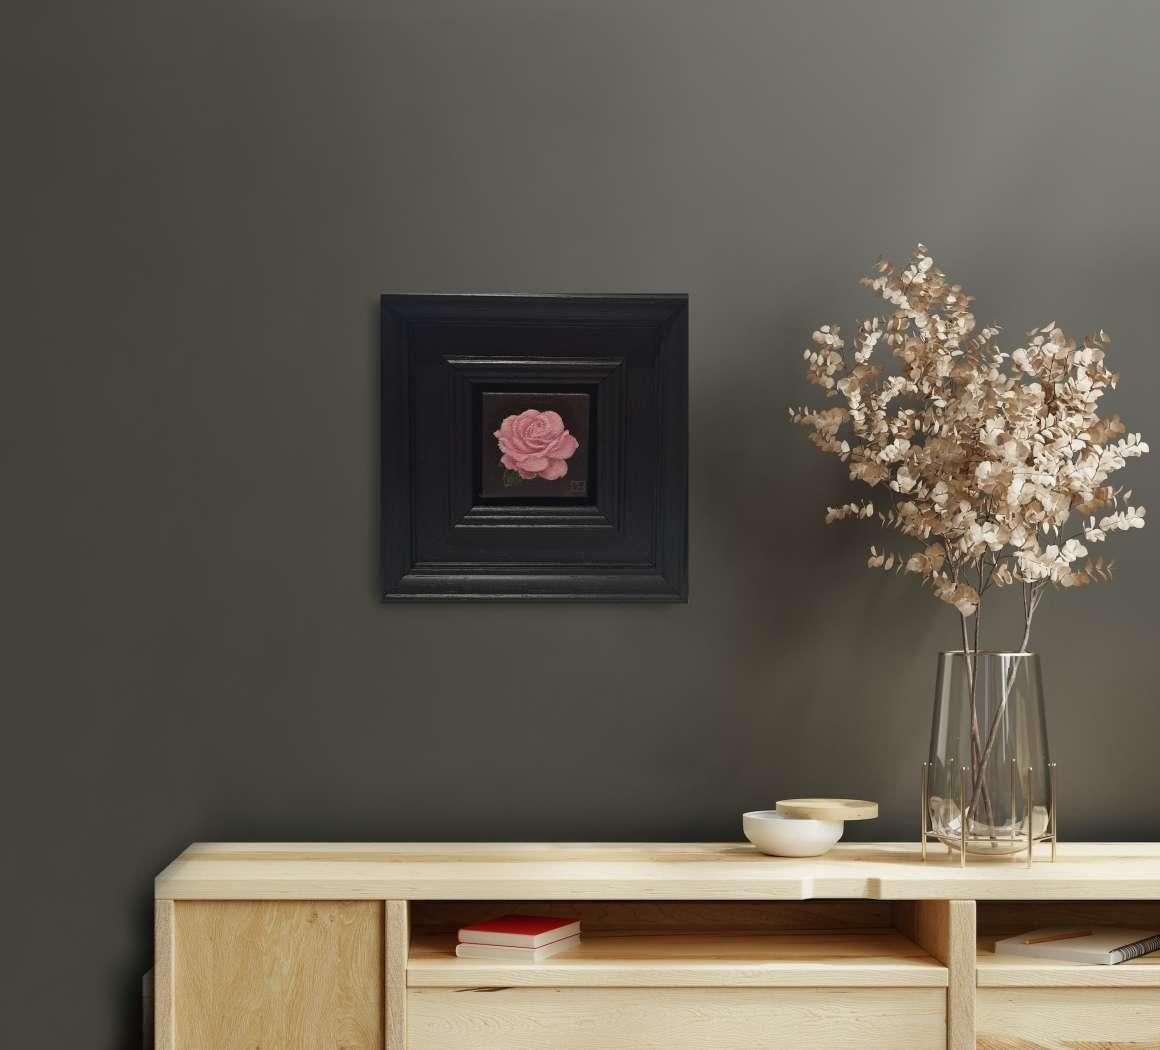 Pocket Pink Rose with Leaf is an original oil painting by Dani Humberstone as part of her Pocket Painting series featuring small scale realistic oil paintings, with a nod to baroque still life painting. The paintings are set in a black wood layered